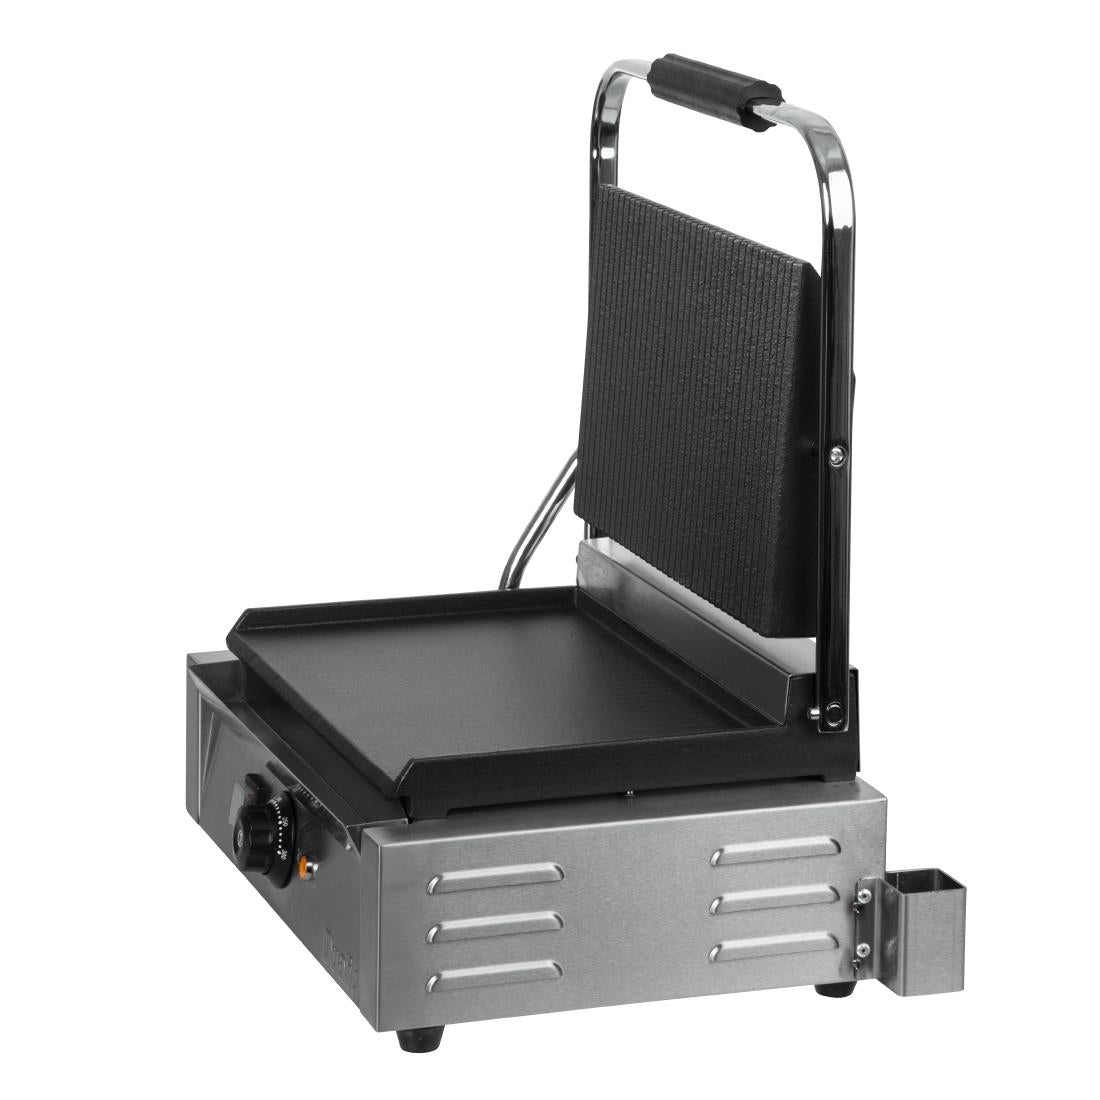 Dualit Caterers Contact Grill 96001 JD Catering Equipment Solutions Ltd